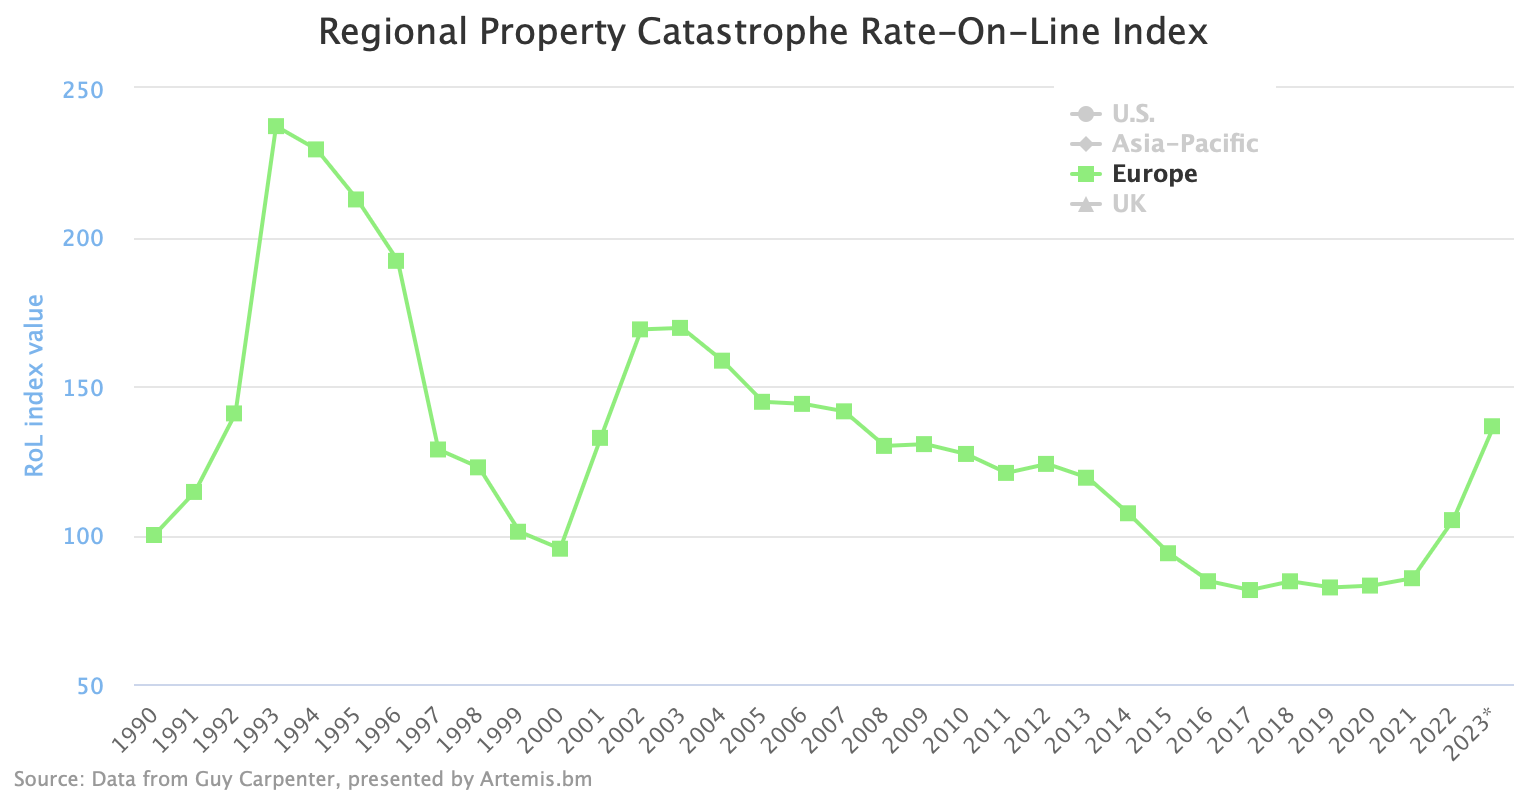 European property cat charges up 60% in two years, highest since 2007: Man Carpenter